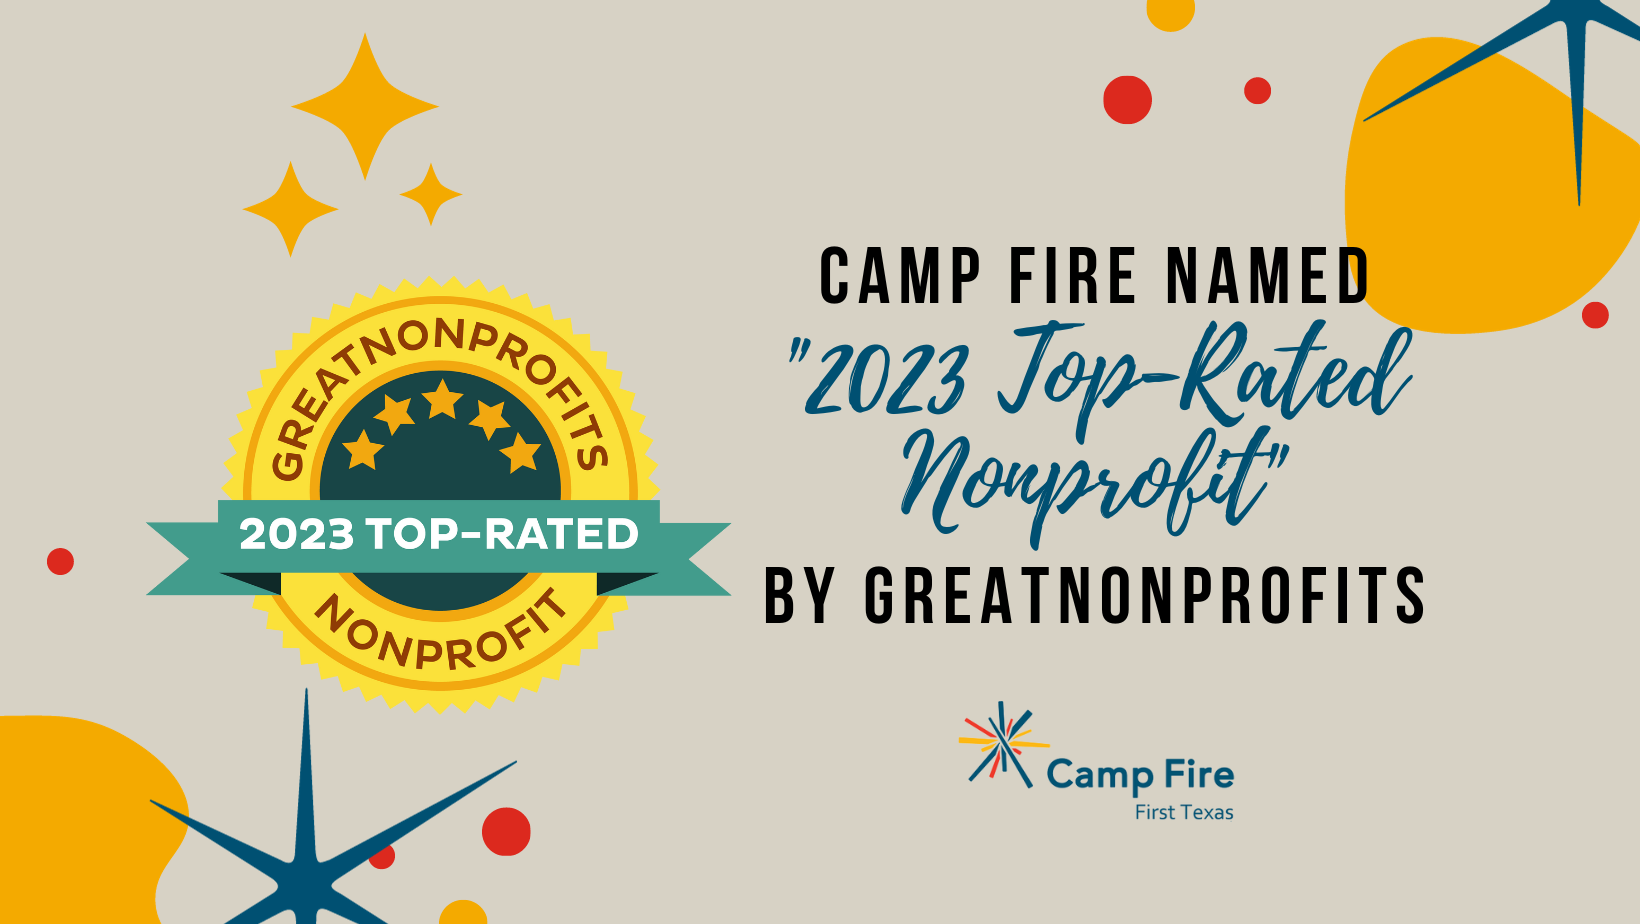 Camp Fire First Texas Named "2023 Top-Rated Nonprofit" by GreatNonprofits, a Camp Fire First Texas blog